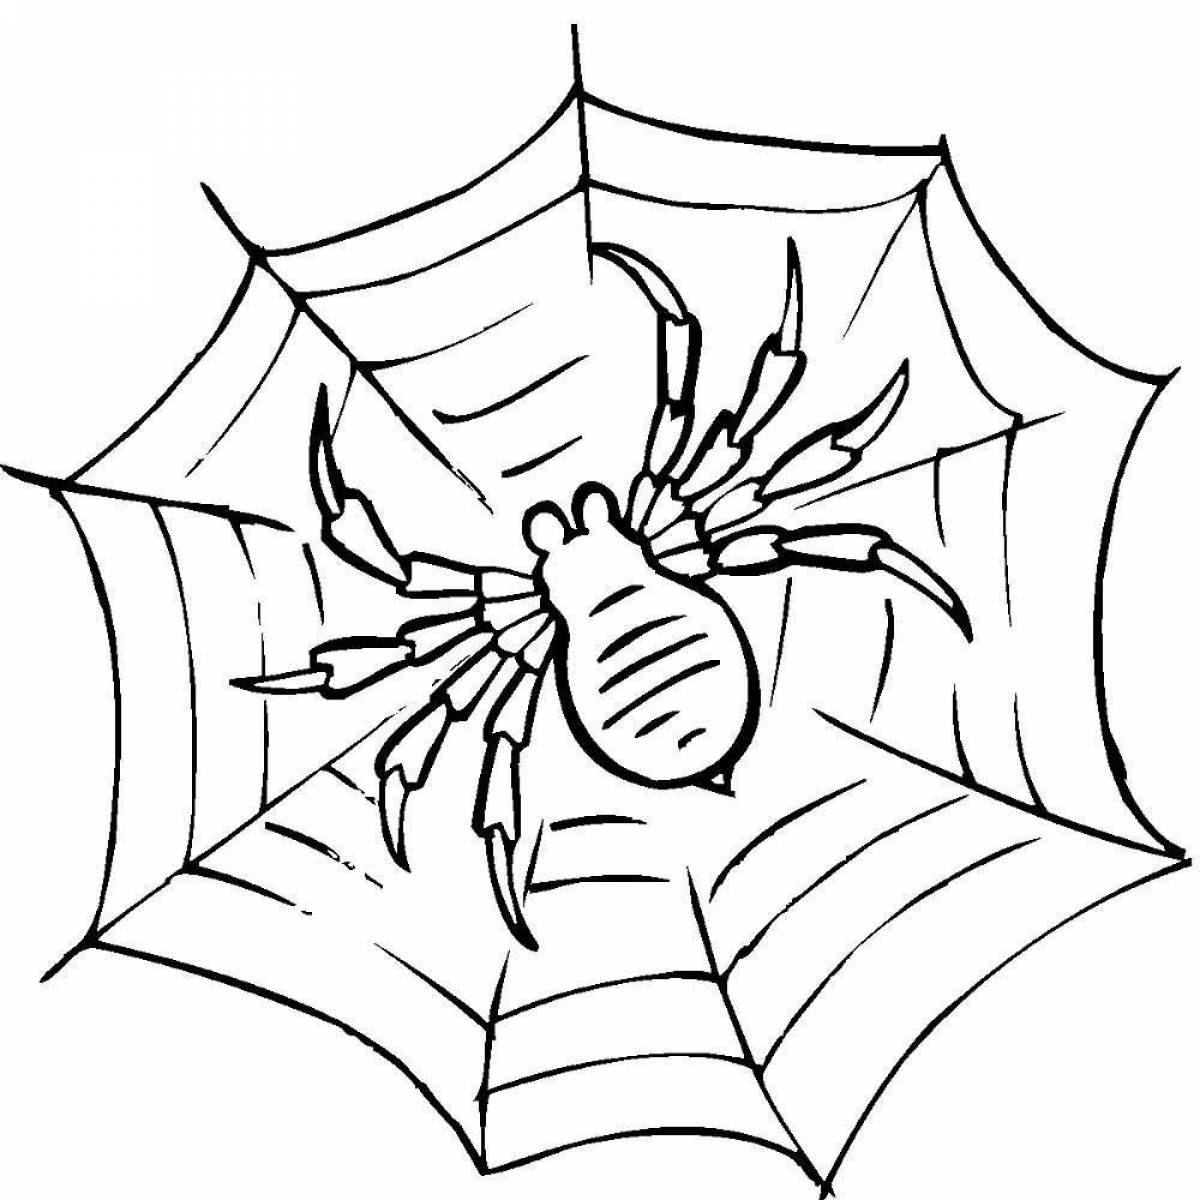 Cute spider coloring page for kids